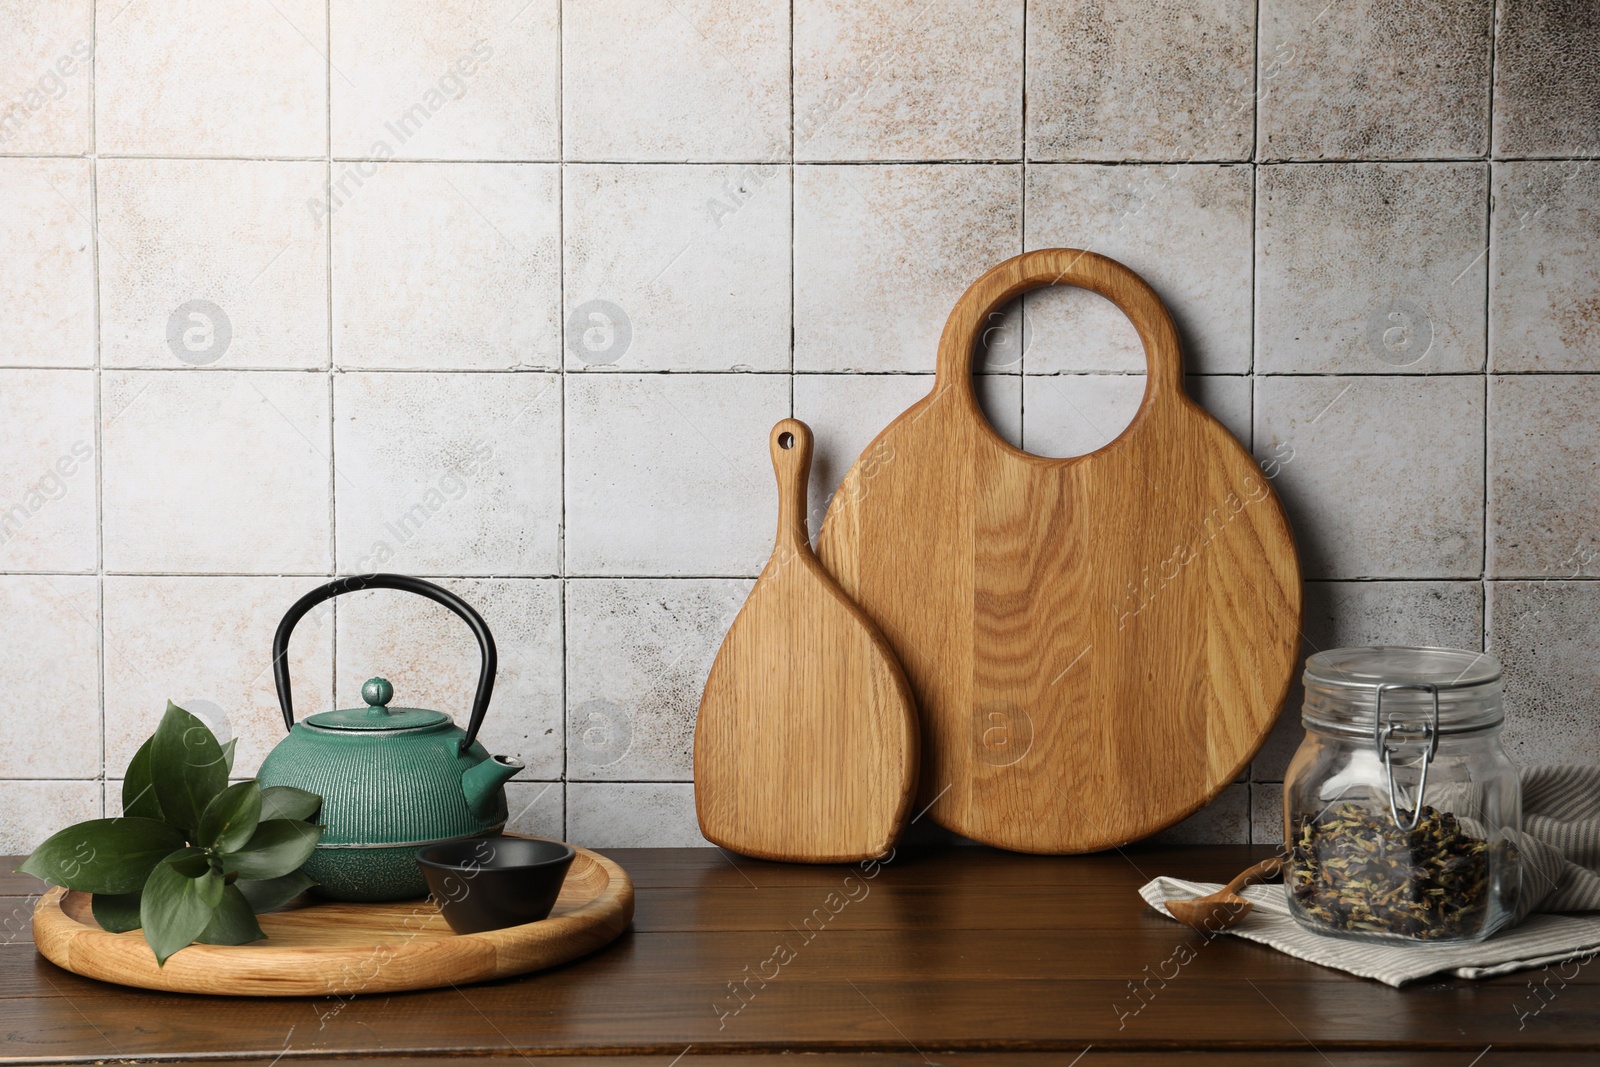 Photo of Wooden cutting boards, kettle and tea on table near tiled wall. Space for text